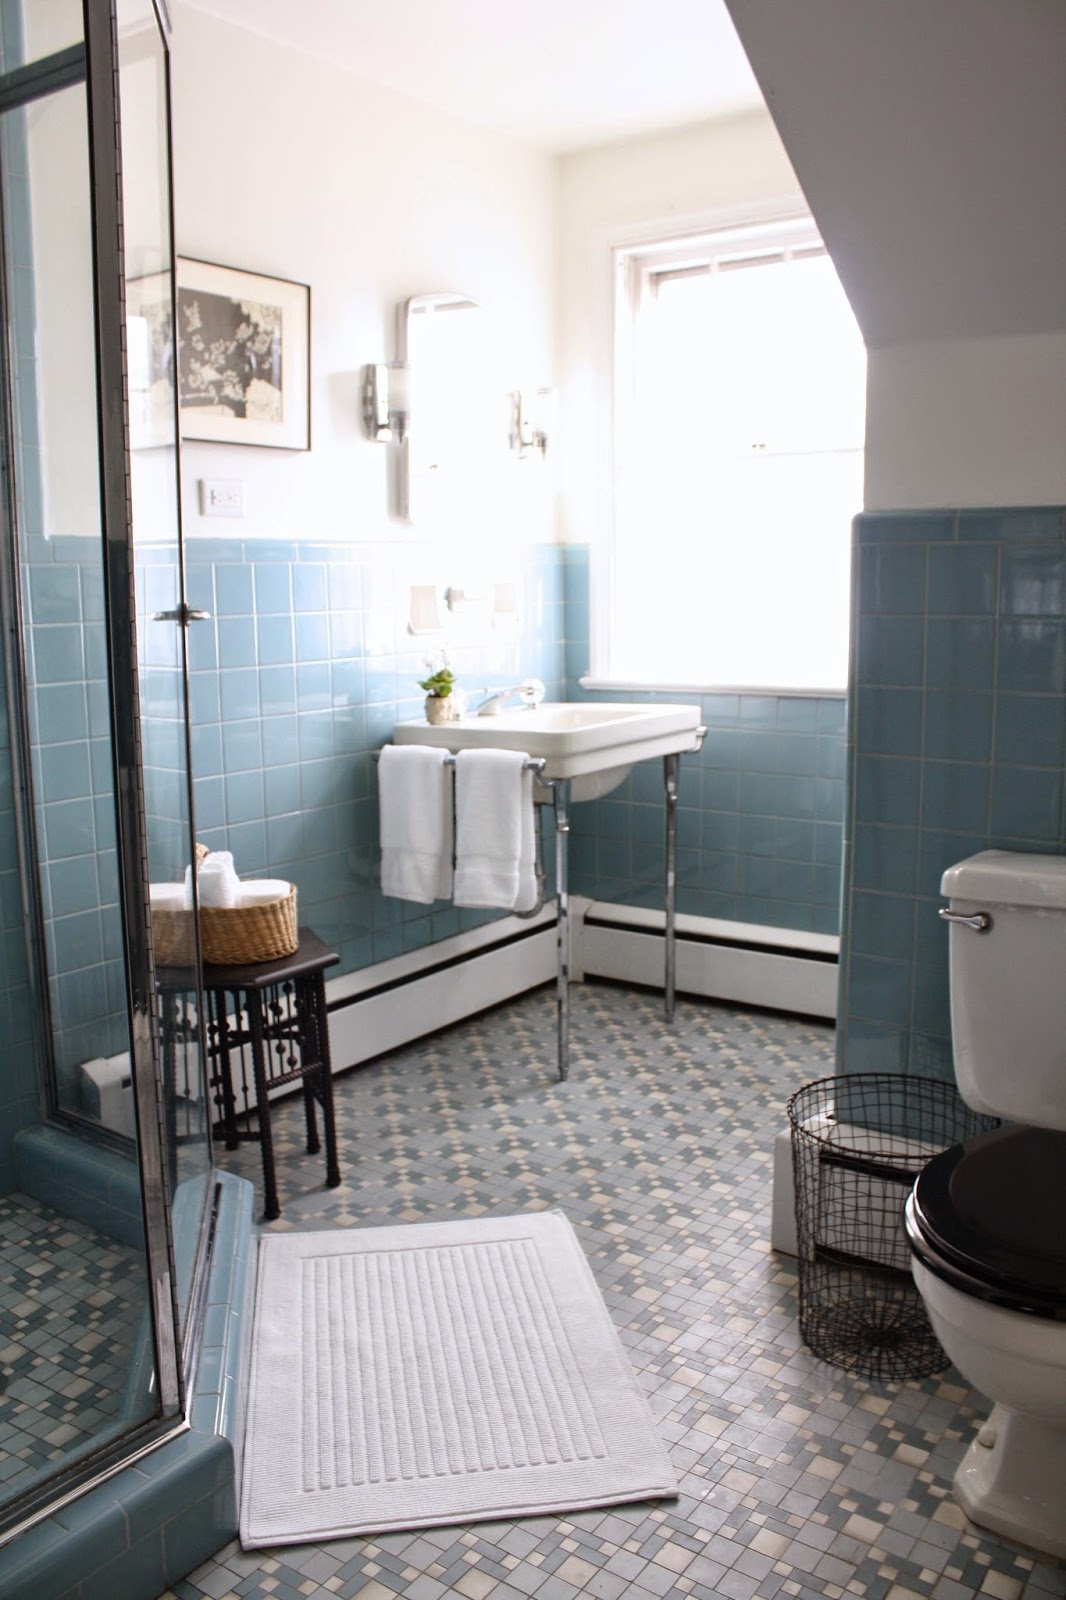 34 magnificent pictures and ideas of vintage bathroom floor tile ideas